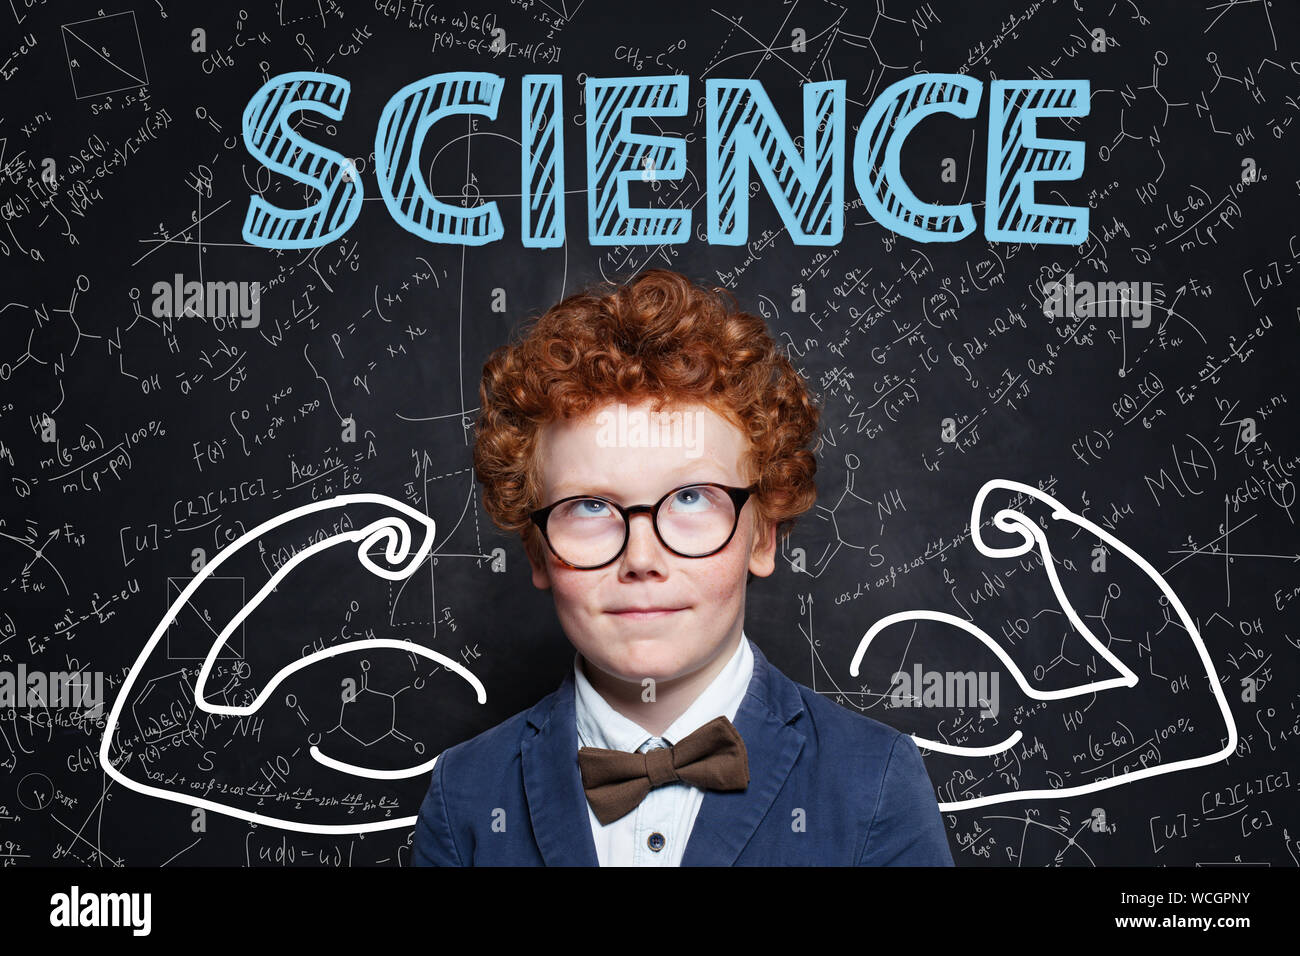 Successful school boy with ginger hair on science background. Learn science and science power concept Stock Photo